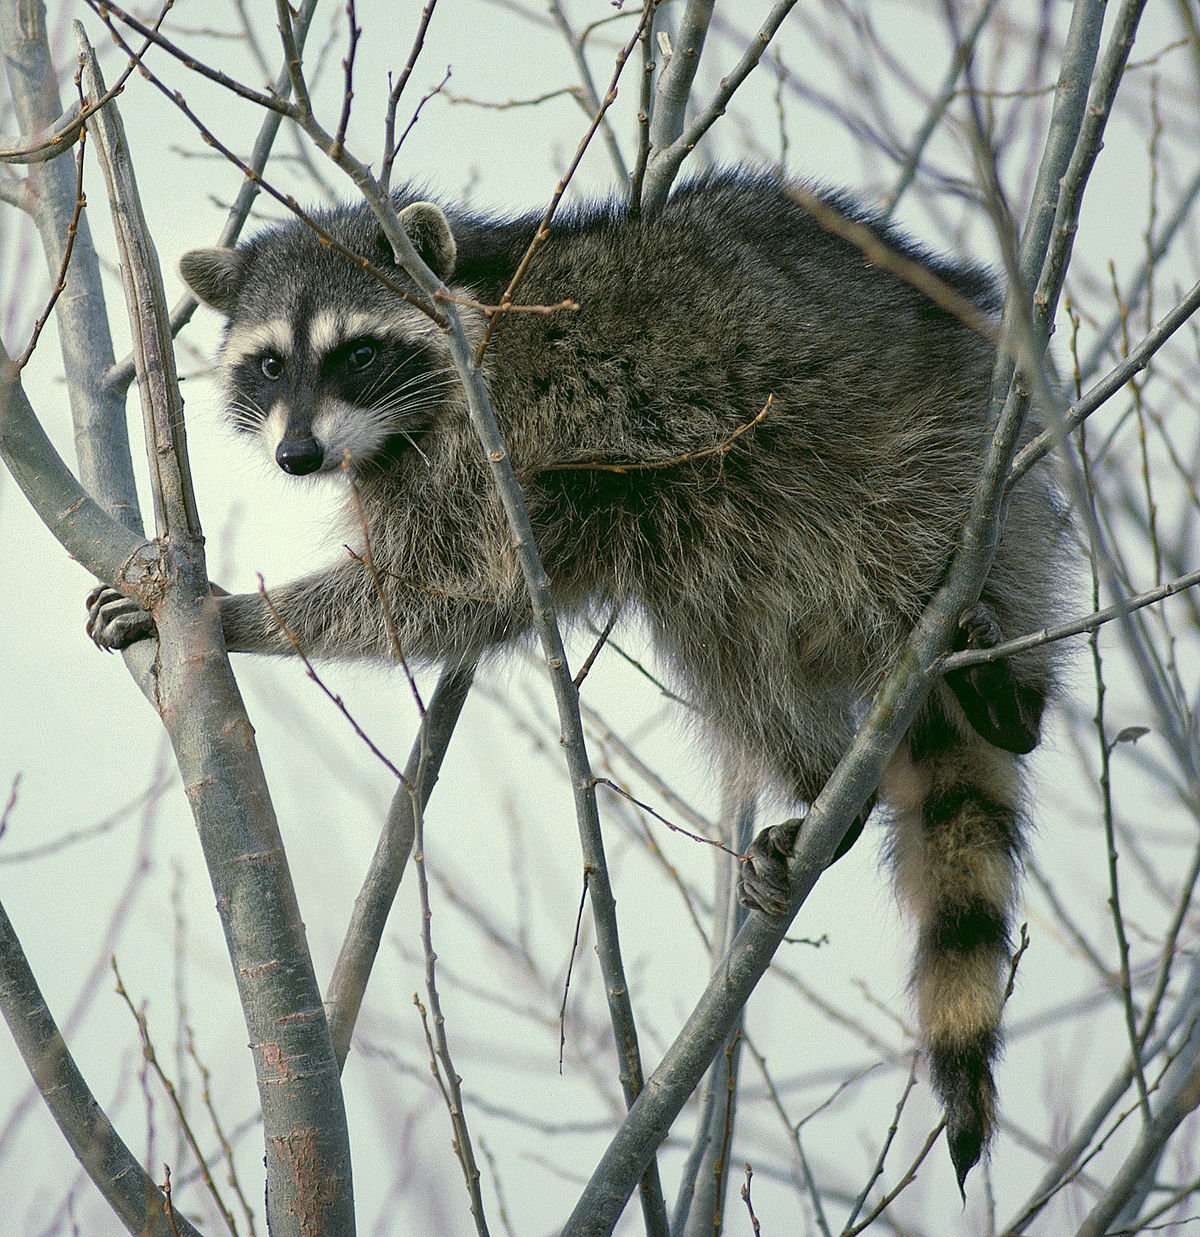 image for TIL Raccoons were able to open 11 of 13 complex locks in fewer than 10 tries and had no problems repeating the action when the locks were rearranged or turned upside down. They can also remember the solutions to tasks for up to 3 years.